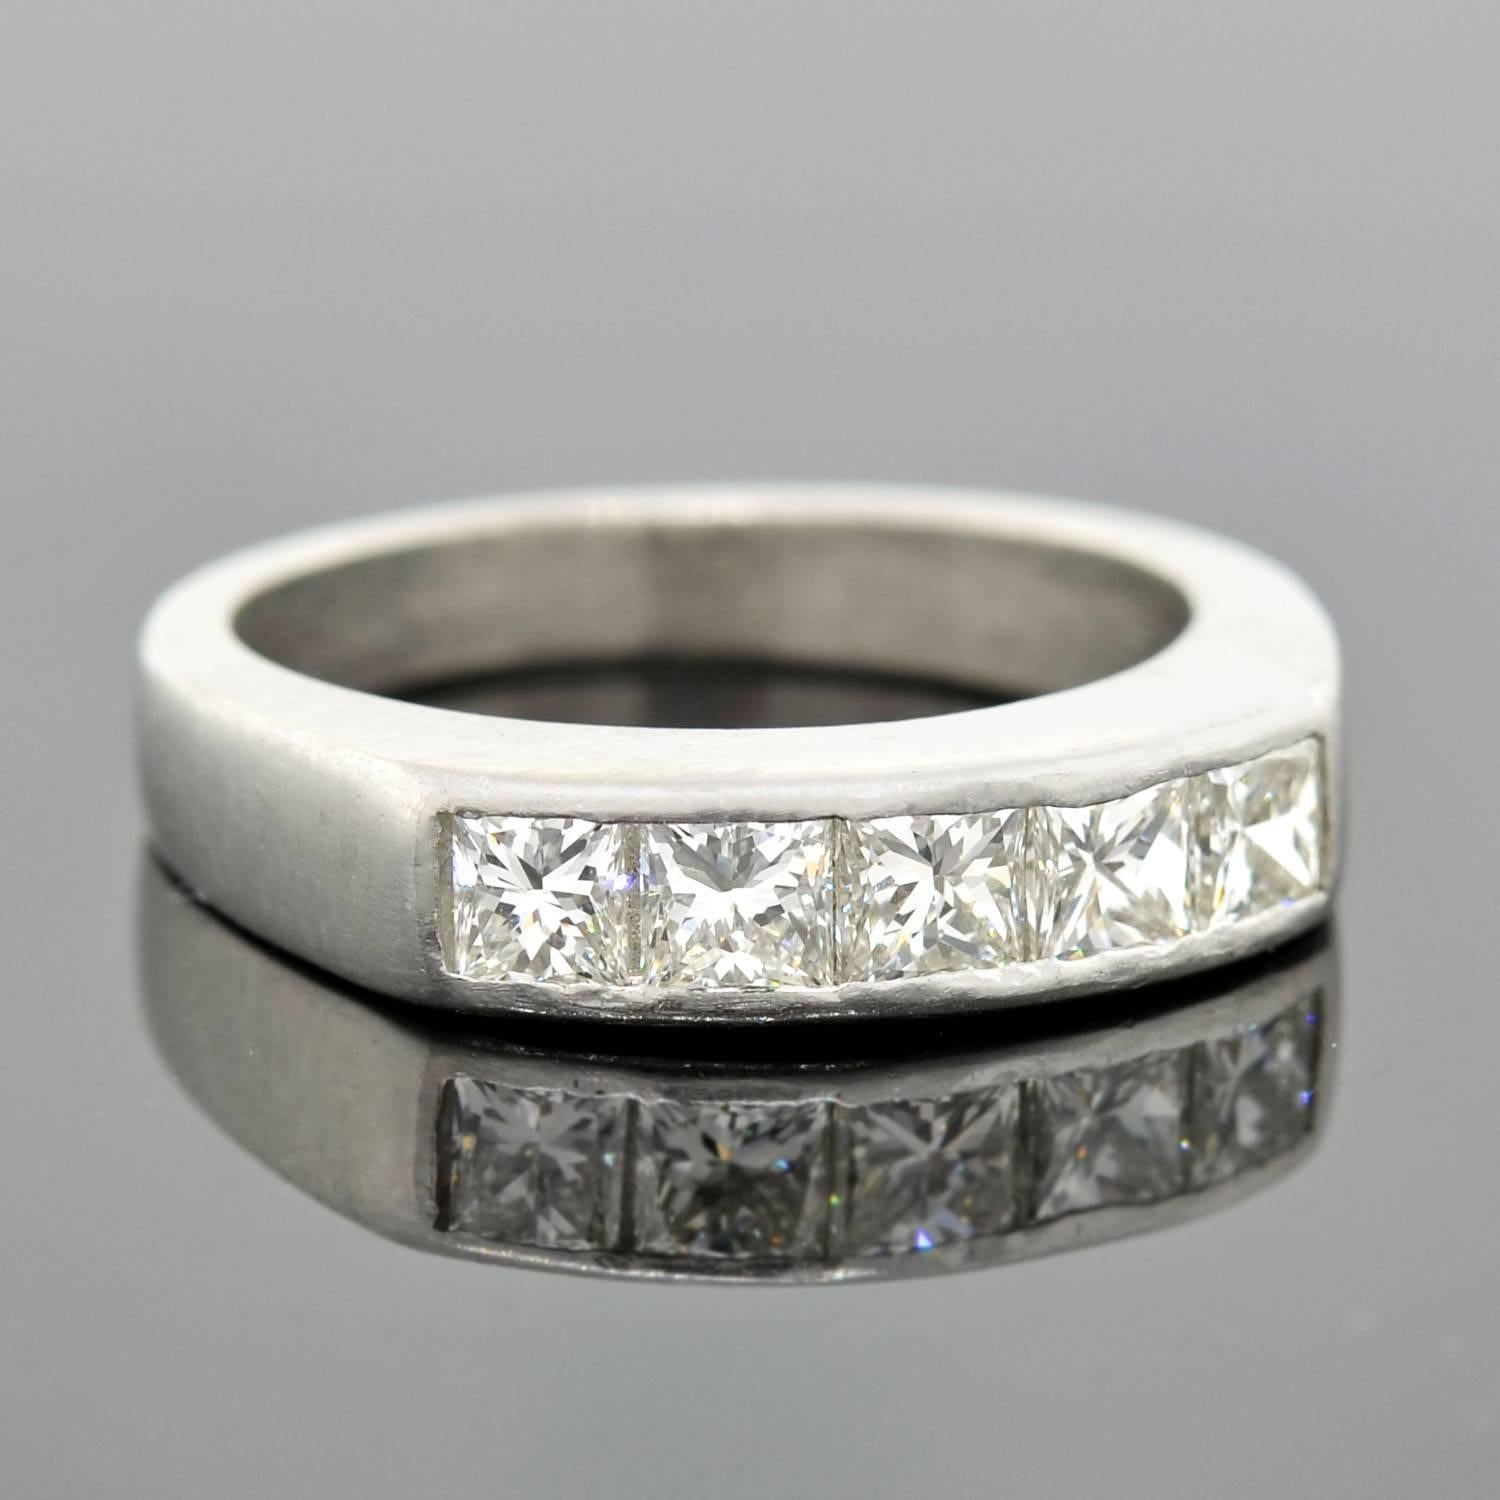 This vintage diamond half band from the 1960s is simply gorgeous! The ring is made of platinum and features a row of 5 Radiant cut diamonds that line the front. Each diamond weighs approximately 0.18ct and rests in a seamless channel setting,